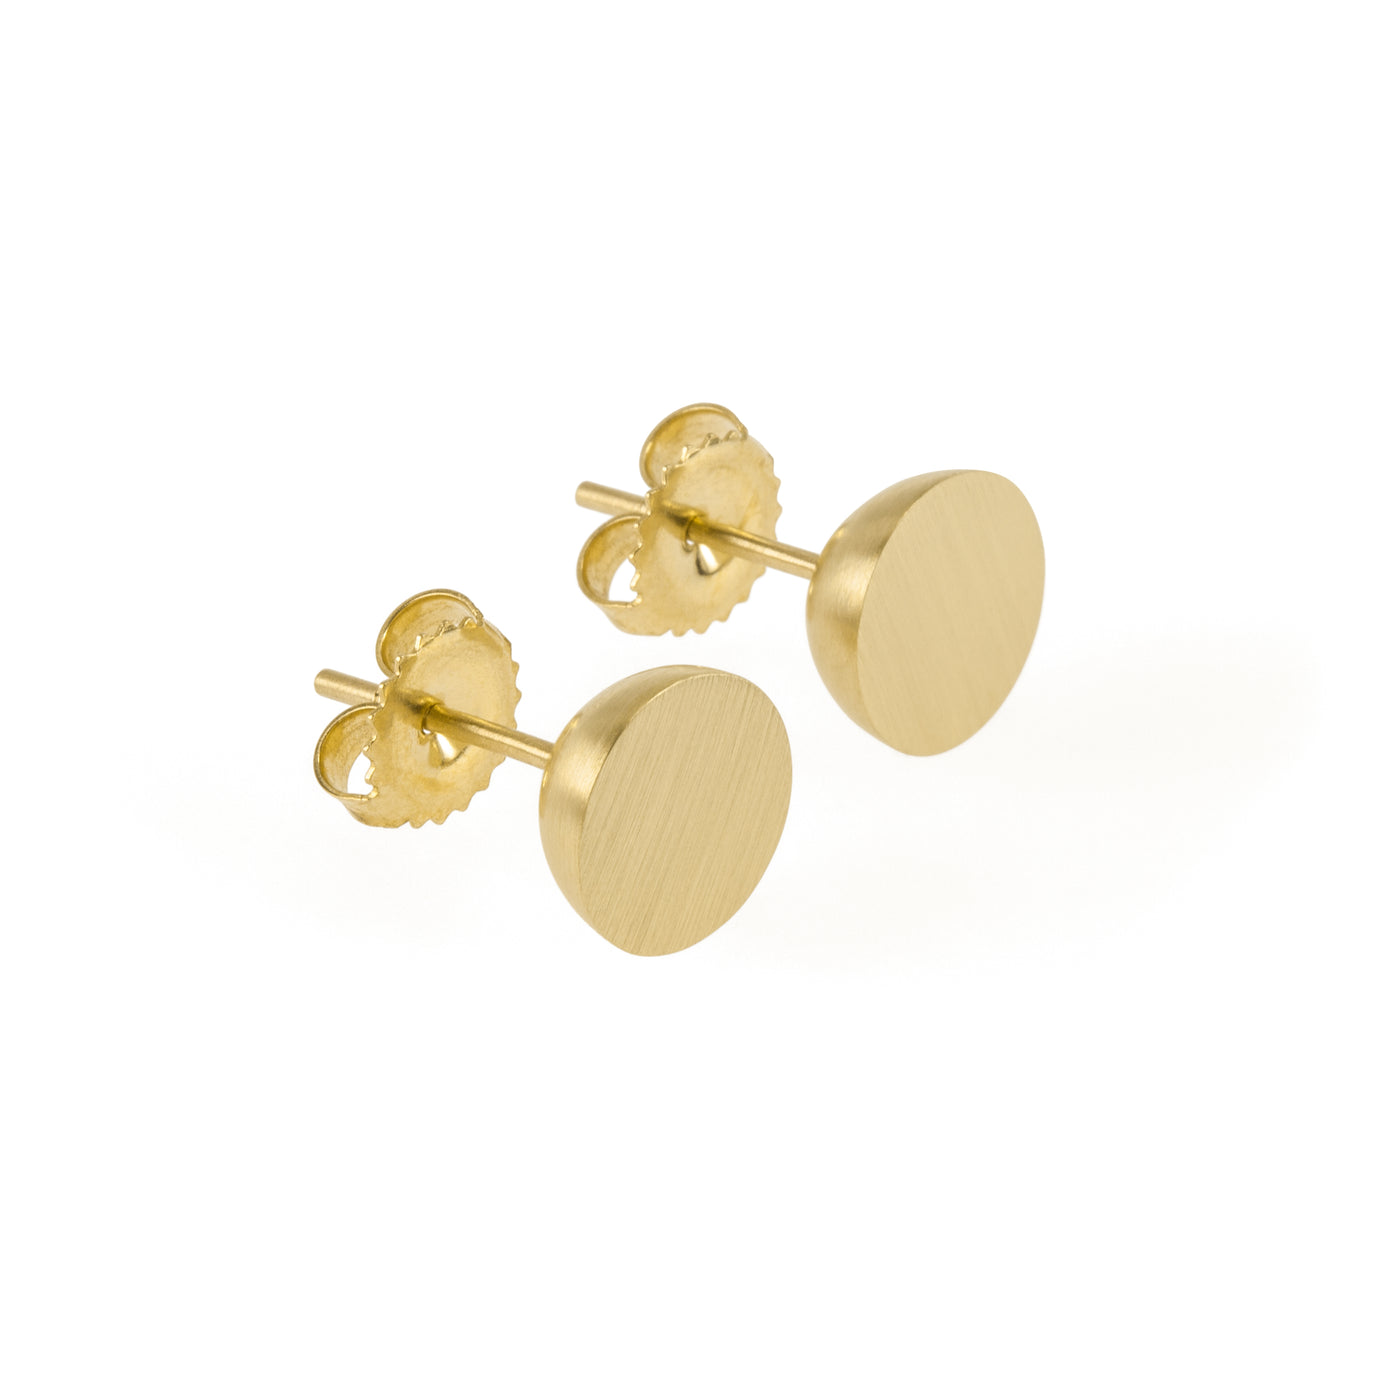 Ethical gold earrings. These minimalist 9mm Hemisphere Studs are handmade in Cape Town in recycled gold from e-waste.